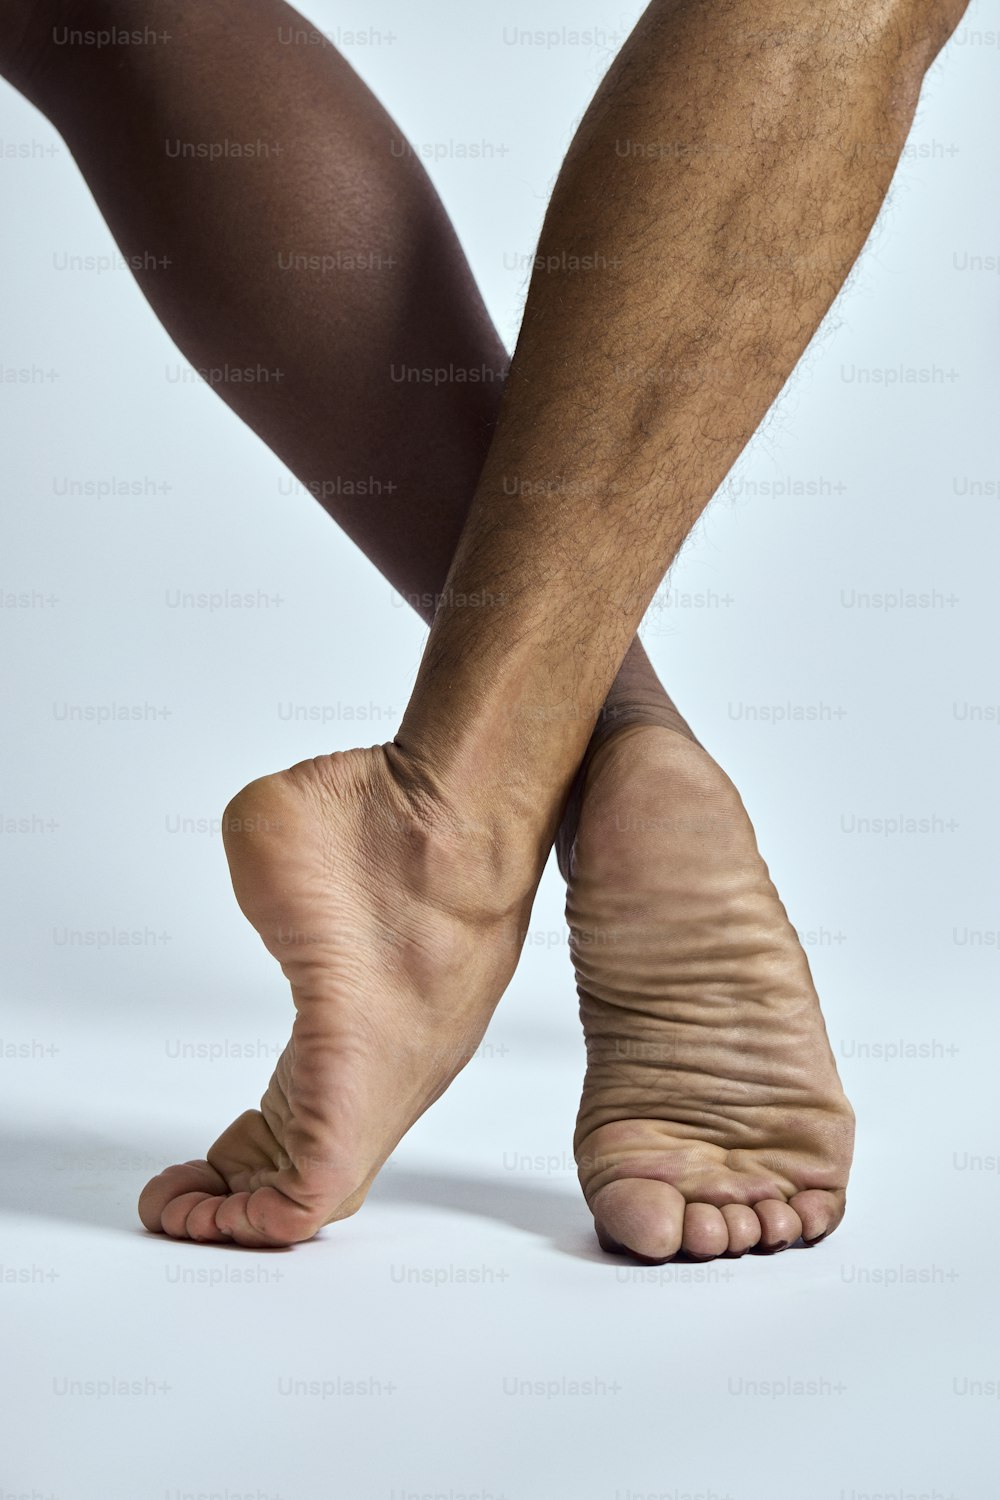 a close up of a person with bare feet